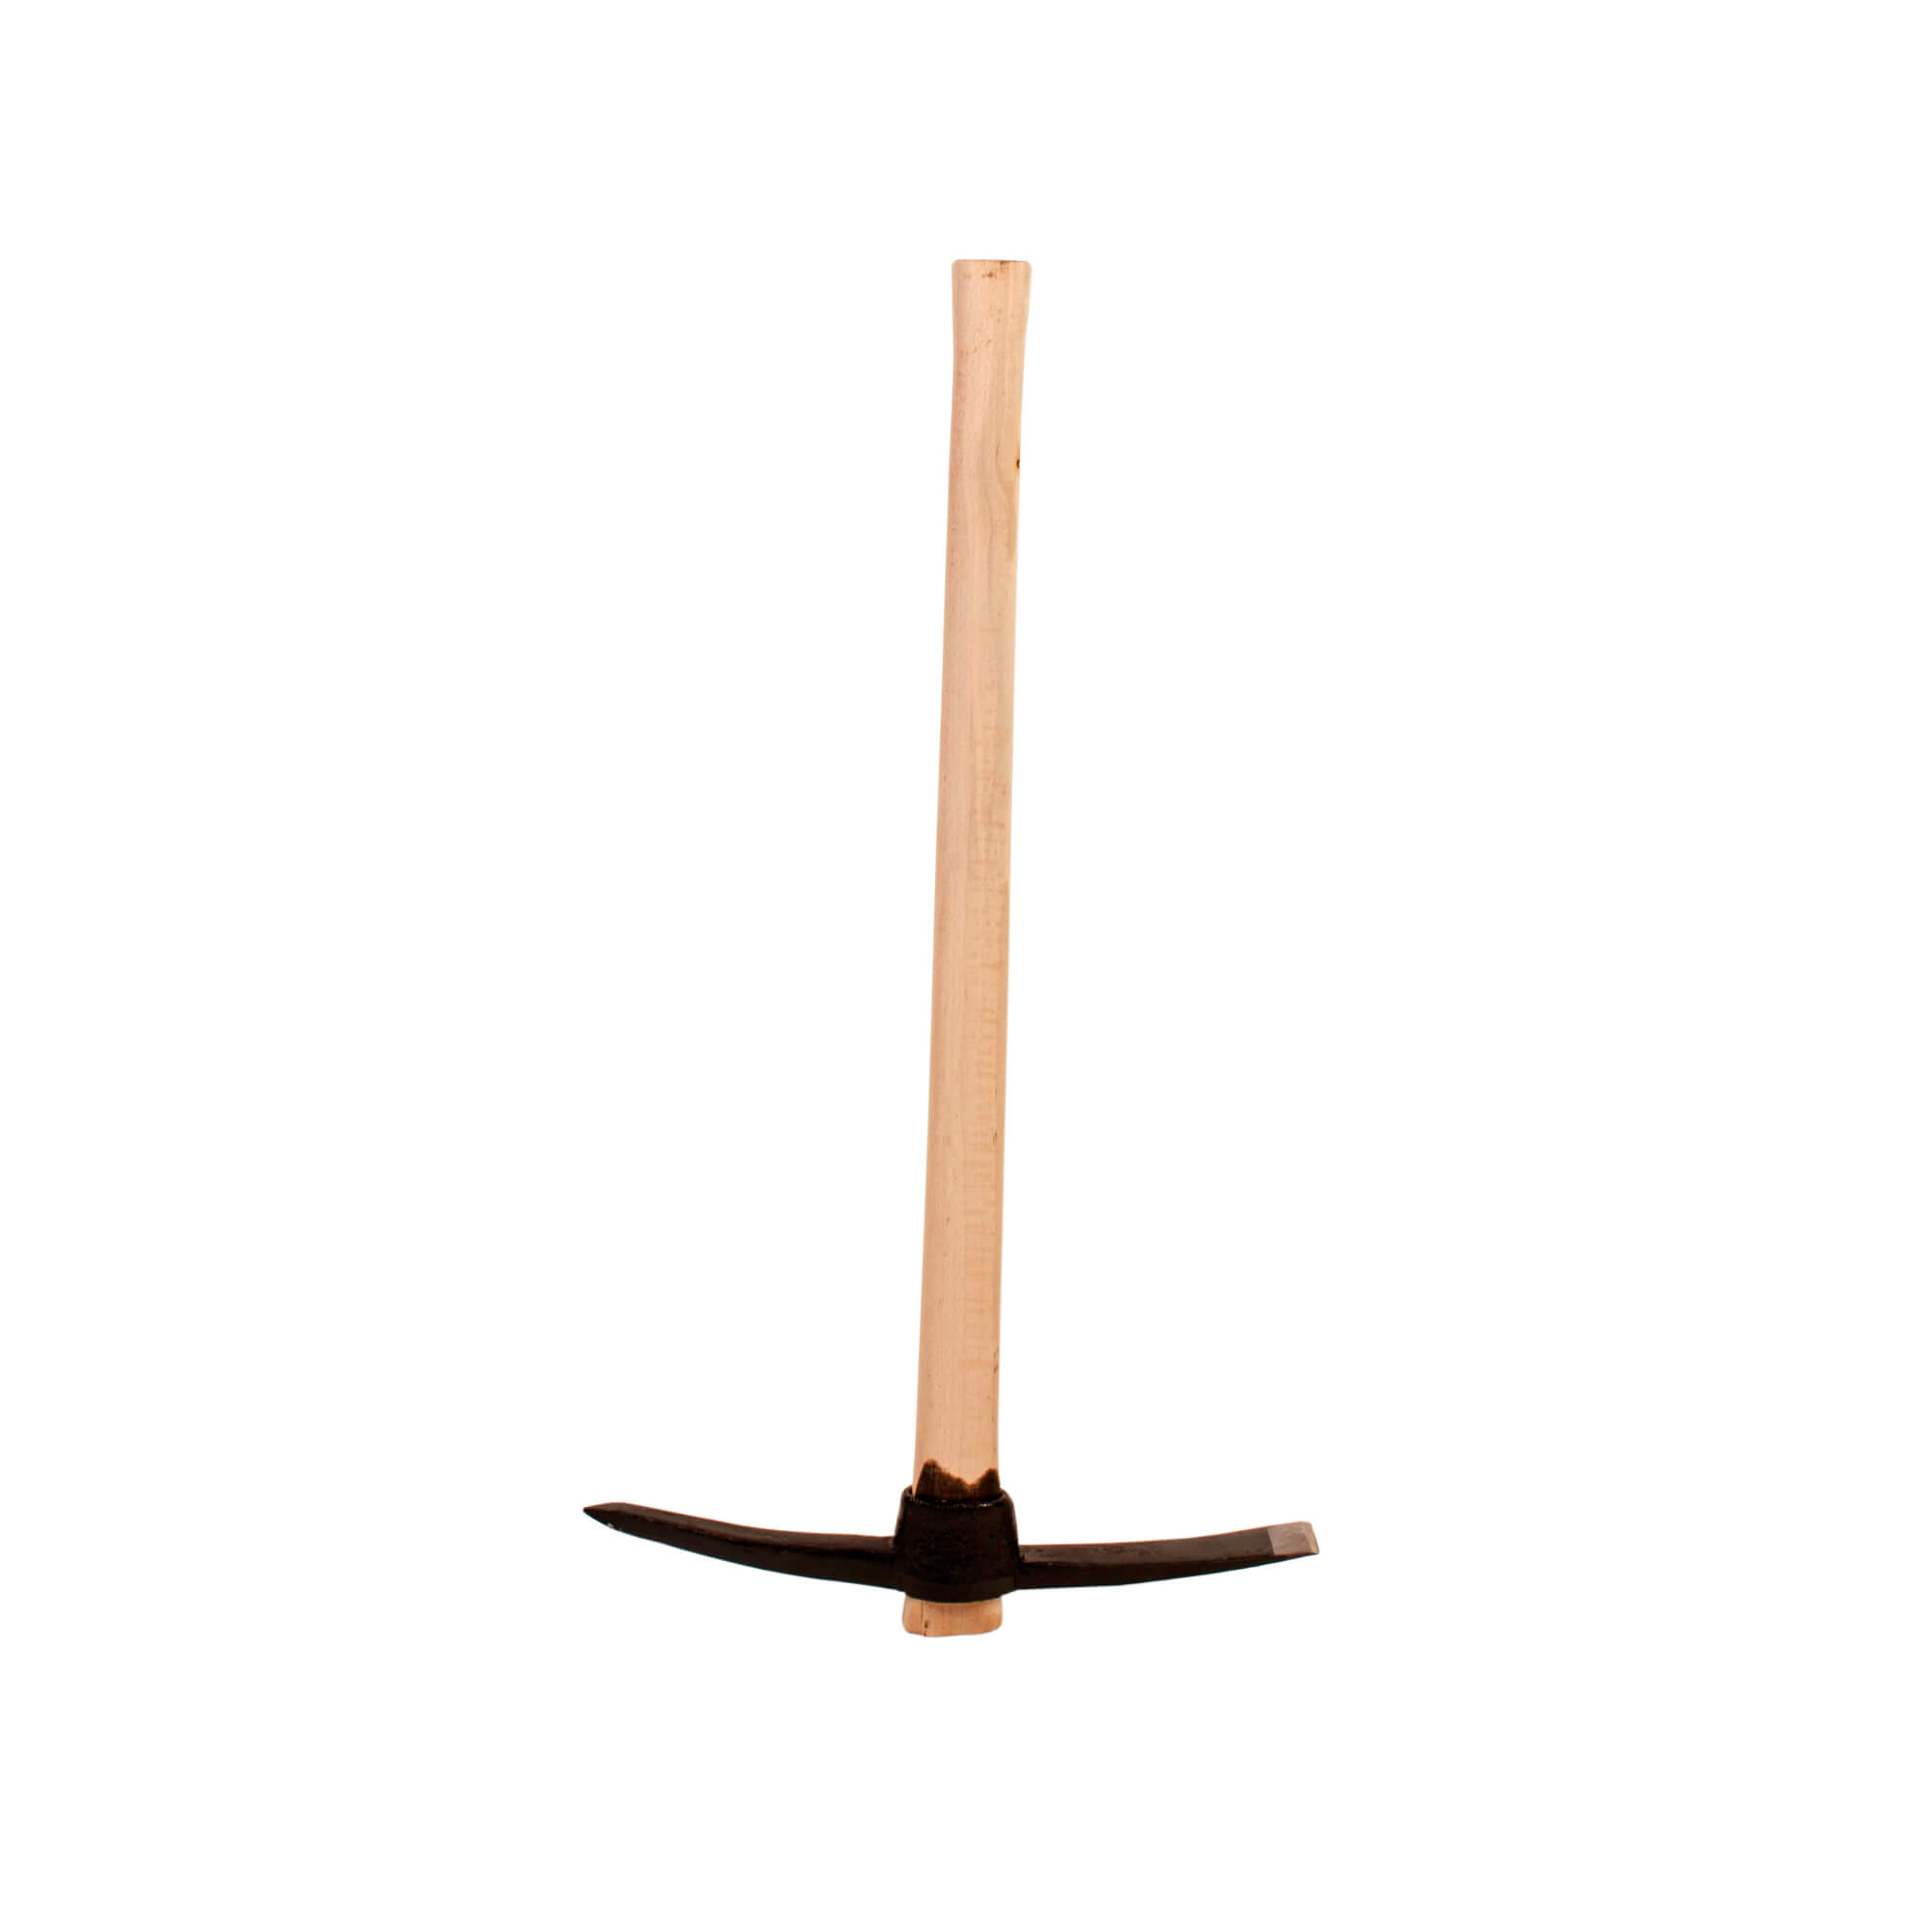 Pickaxe with handle 2500 g